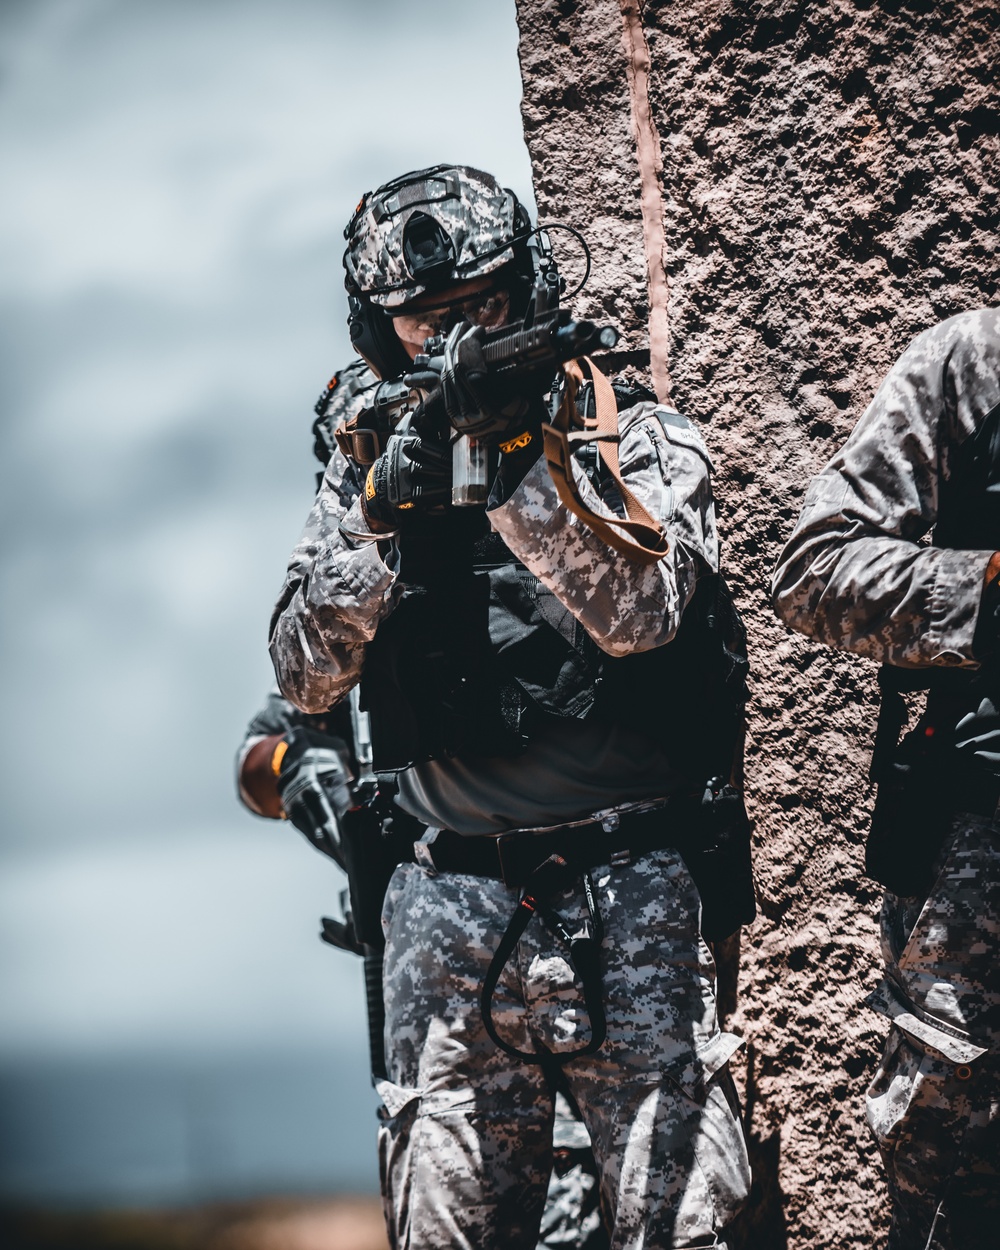 RIMPAC 2022: US Army, Indian SOF work together